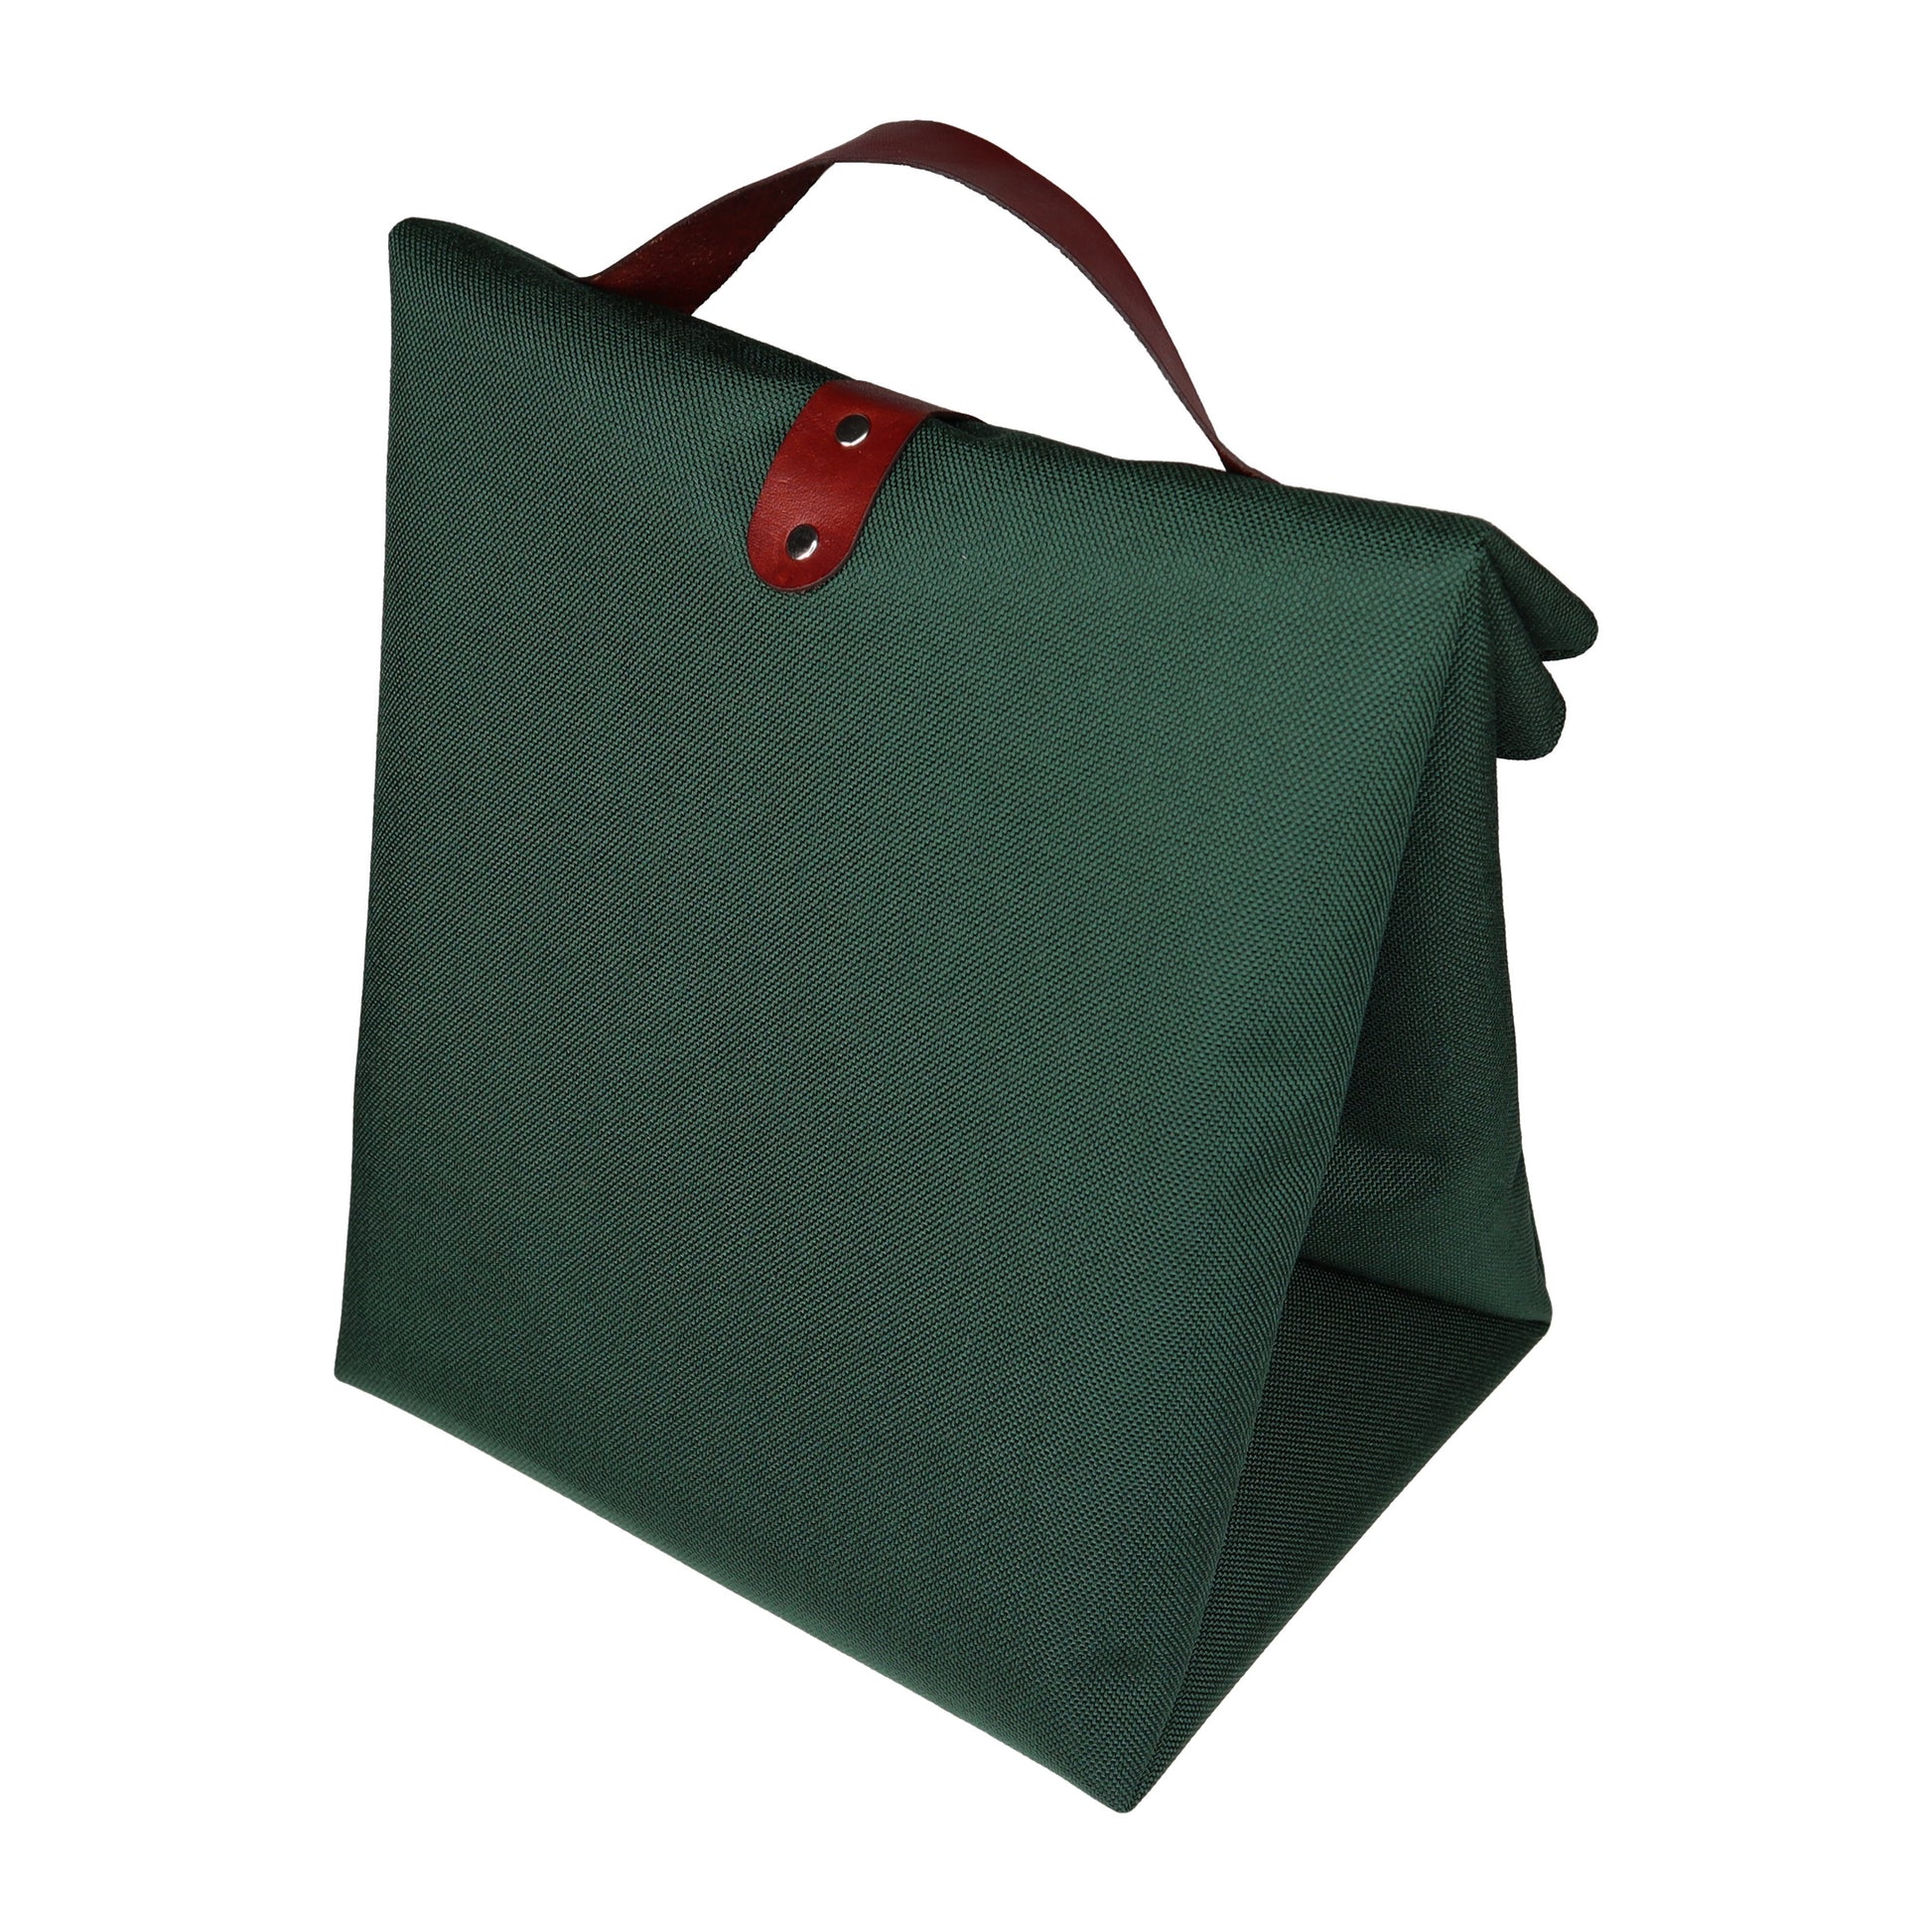 Green Canvas & Leather Fold Top Lunch Bag